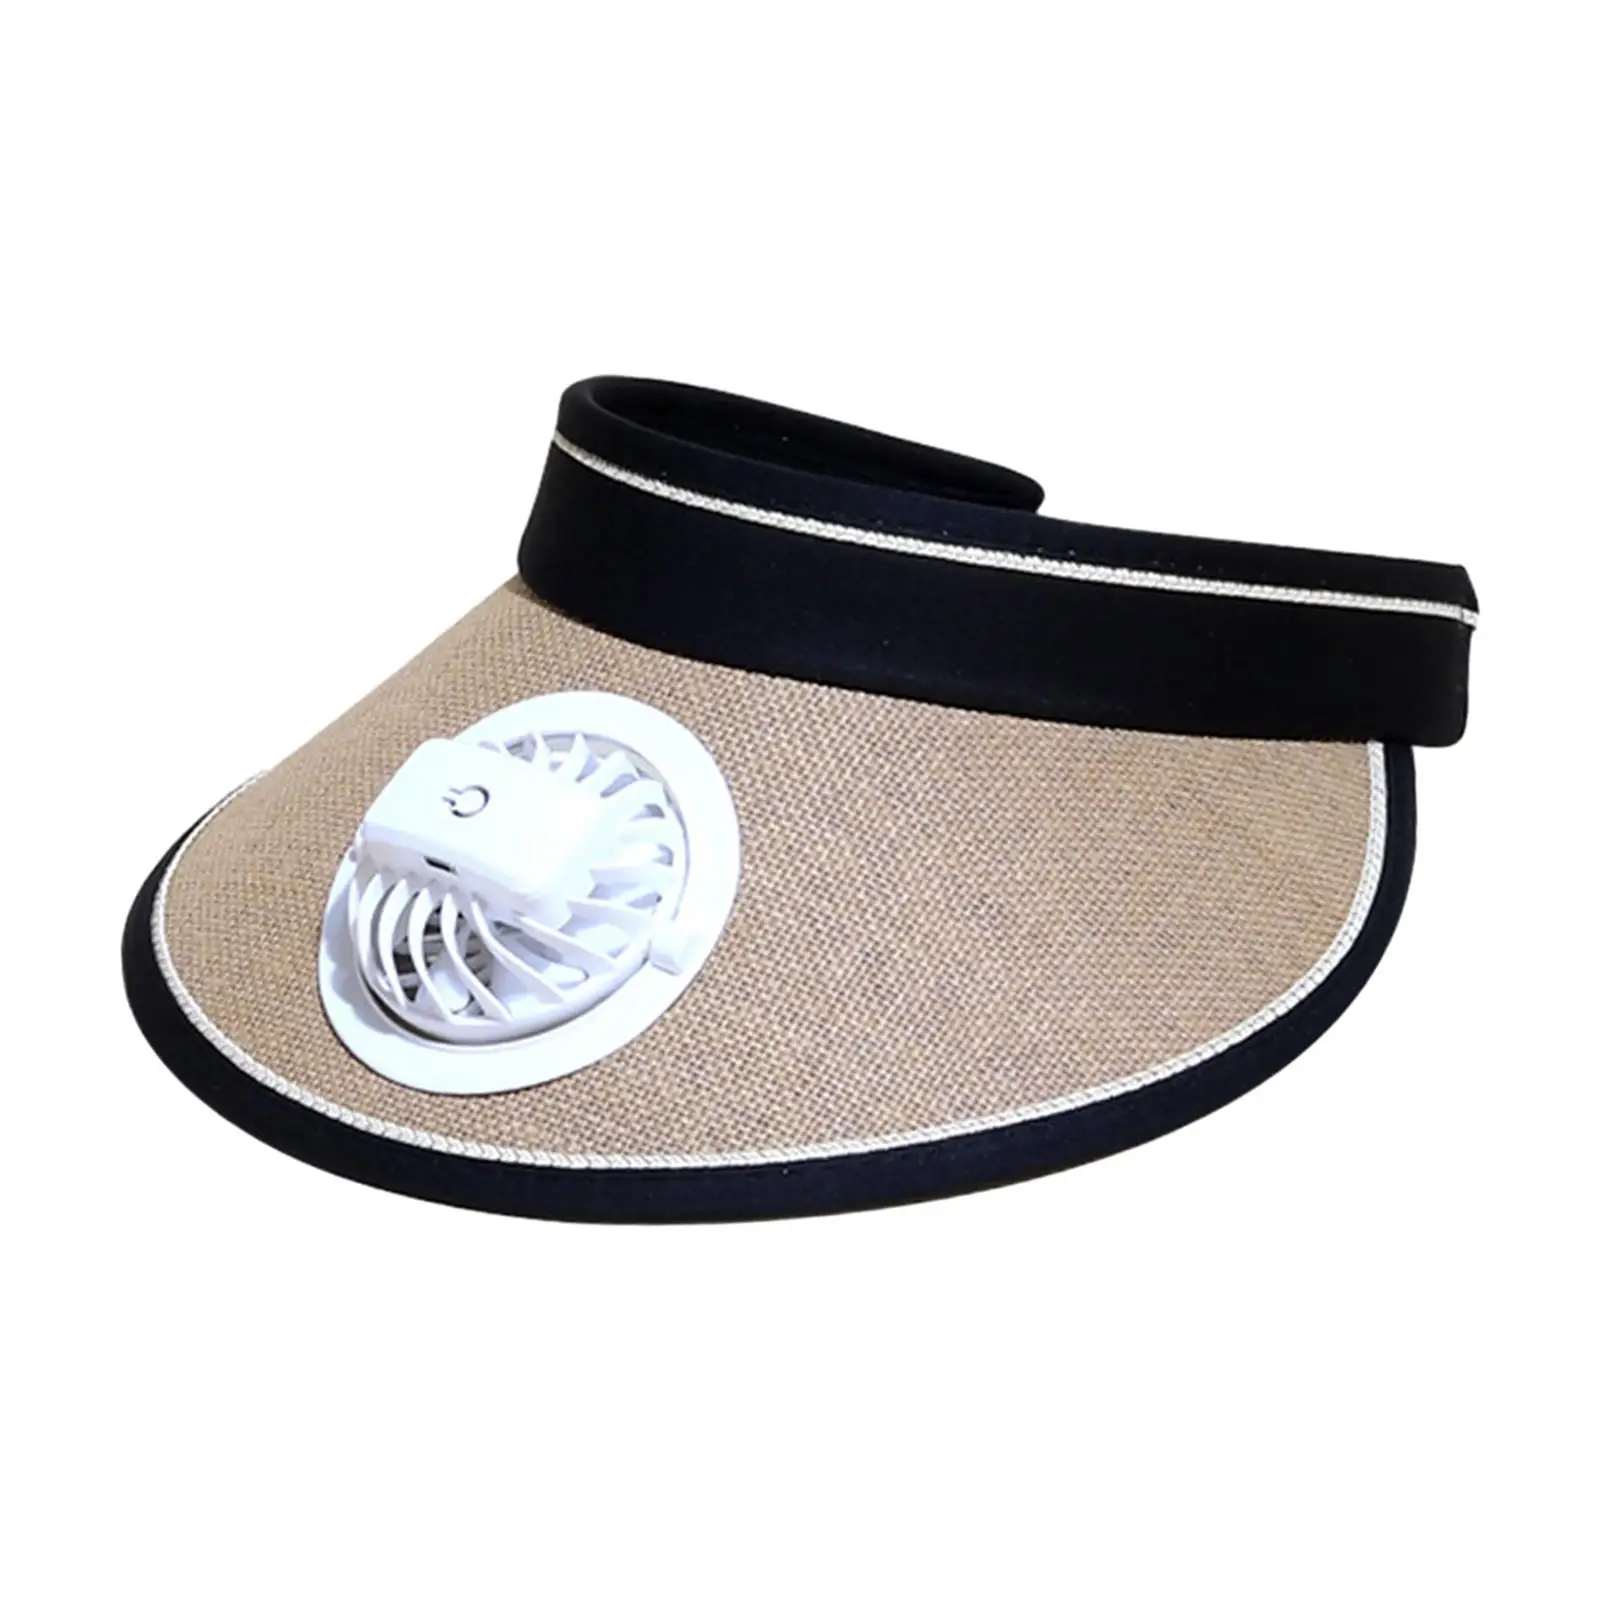 Beach Hat Sunshade Cap with Fan Large Brim Comfortable Three Adjustable Speeds Multifunctional Fashionable for UV Protection